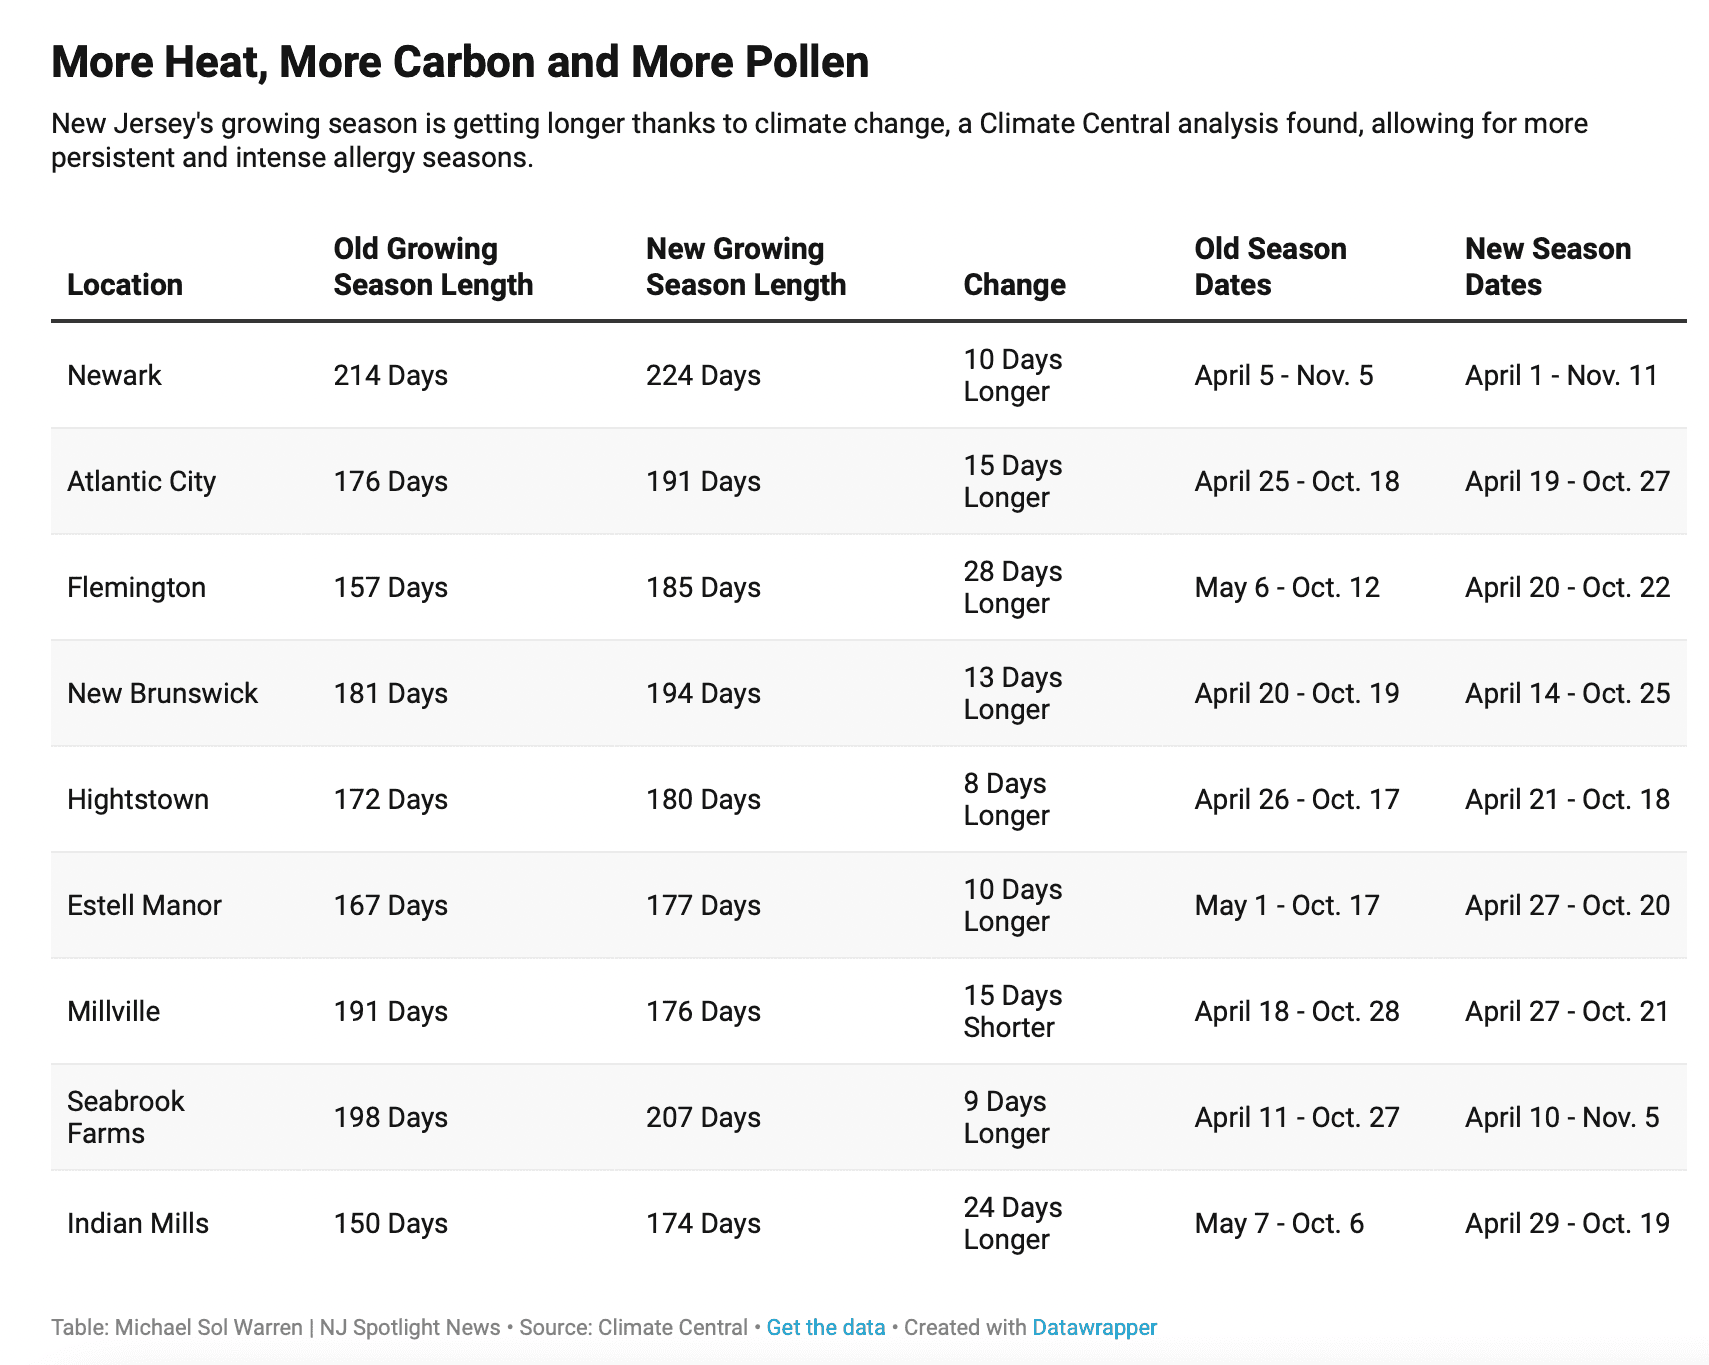 Table: Michael Sol Warren | NJ Spotlight News  Source: Climate Central  Get the data  Created with Datawrapper